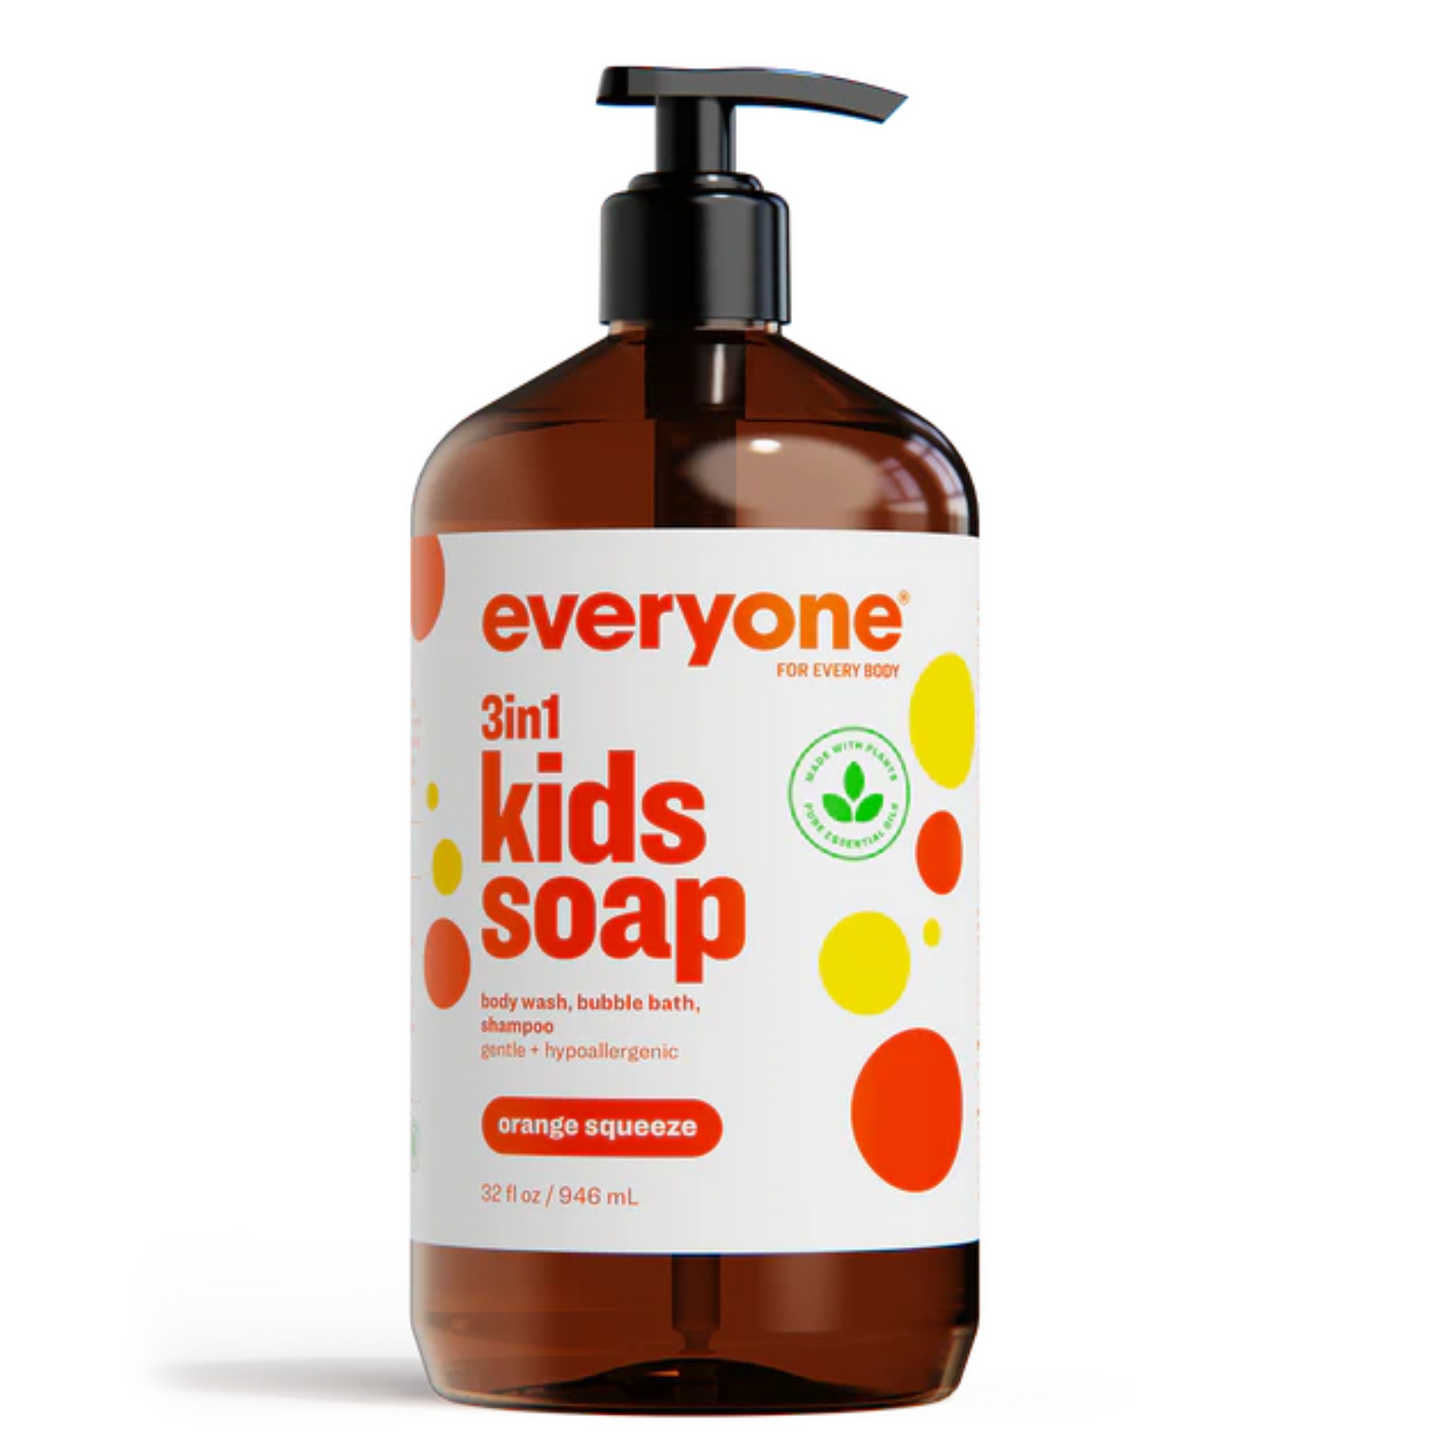 Primary image of Everyone for Kids 3-in-1 Orange Squeeze Soap